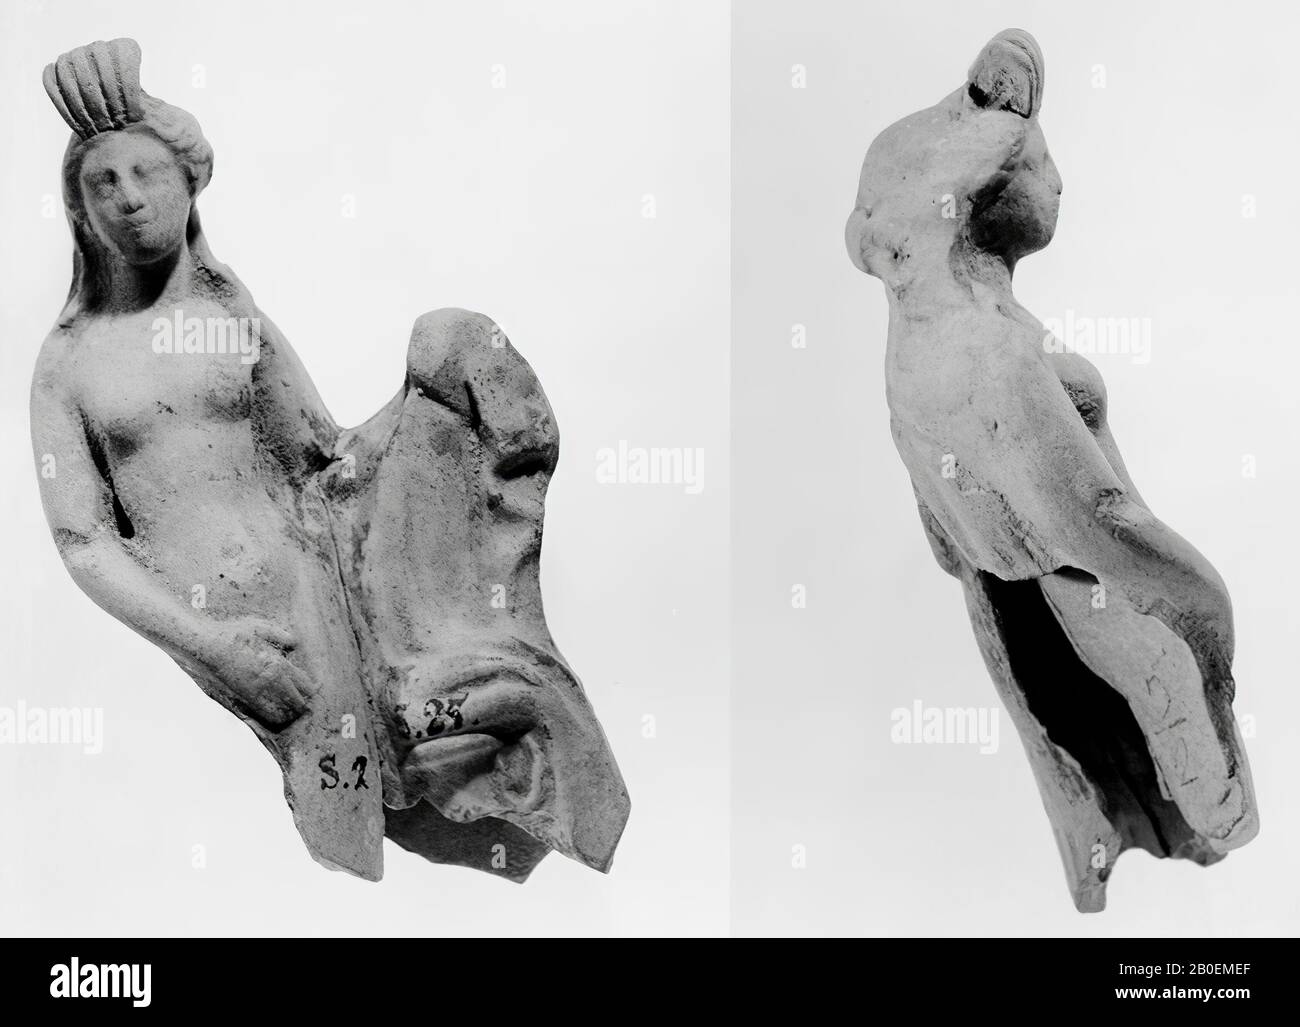 From Smyrna. Hellenistic terrracotta figurine fragment of a Hermaphrodite? Part of the drapery covers the right upper leg. The body has long limbs. The head, the arms and the lower legs are missing., Figurine, fragment, head, pottery, terracotta, 5.2 cm, hellenistic -325 Stock Photo